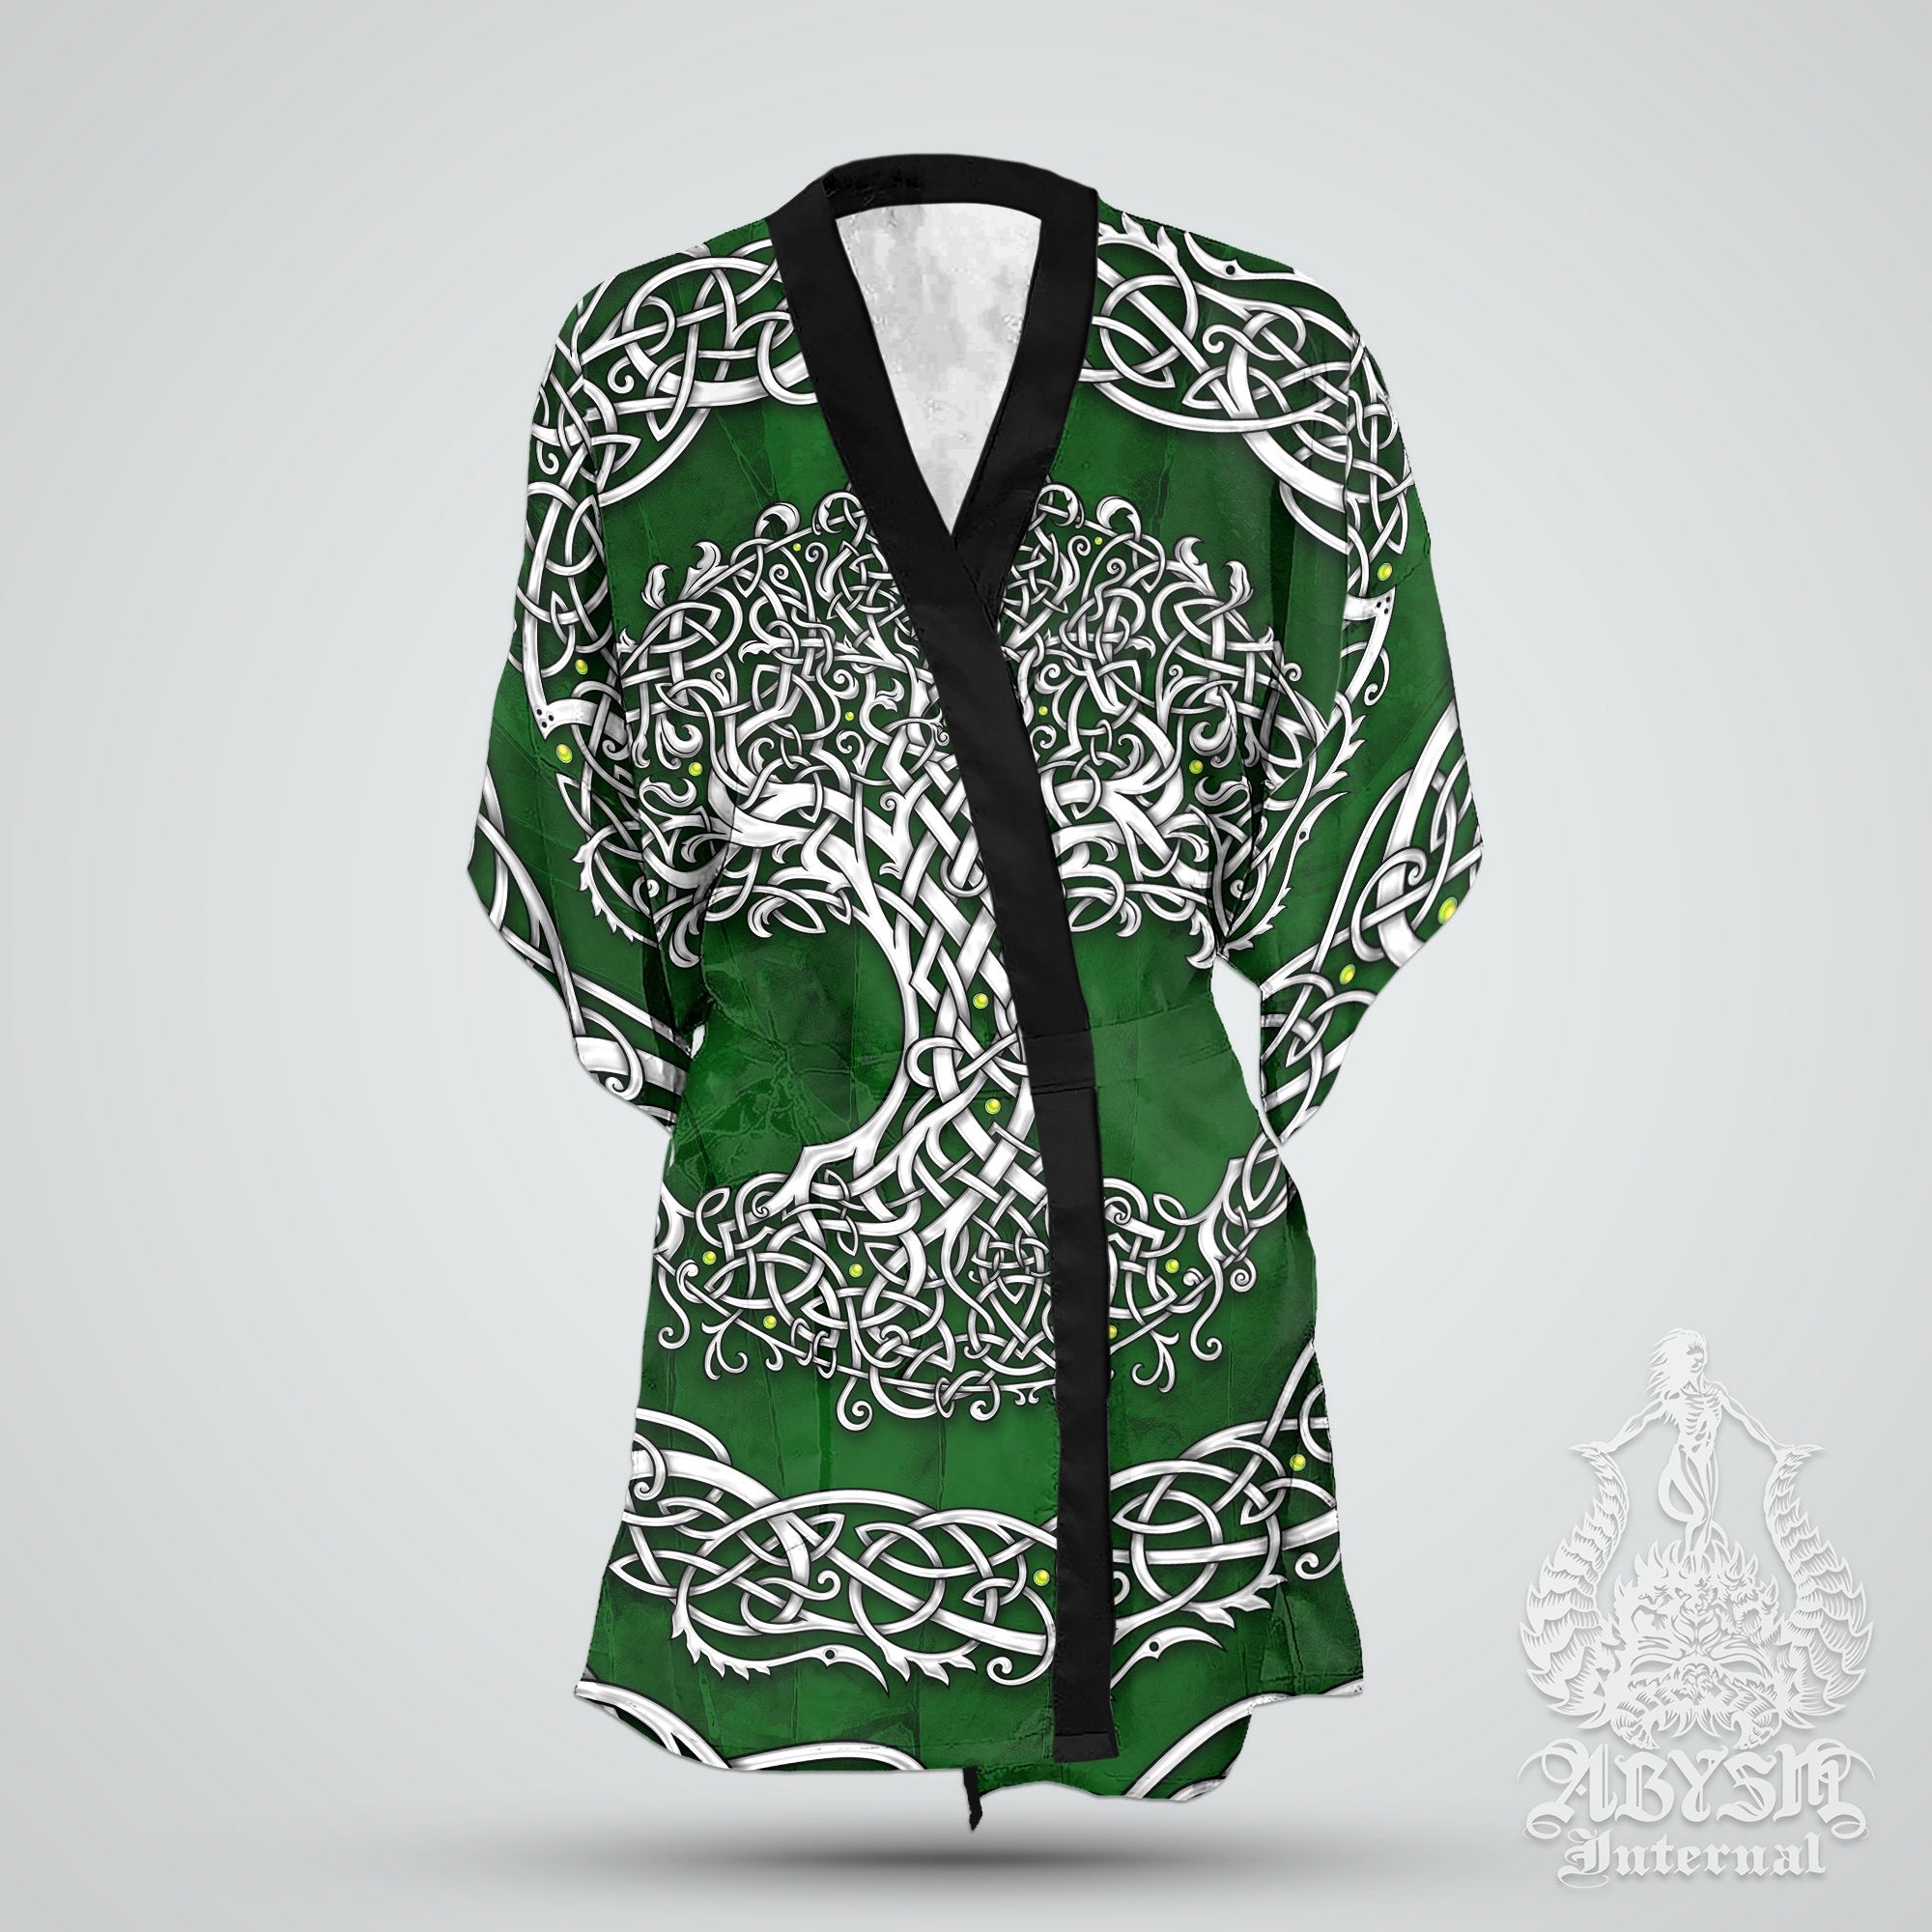 Tree of Life Short Kimono Robe, Beach Party Outfit, Hippie Coverup, Celtic Wicca Summer Festival, Witchy Indie Clothing, Unisex - White and Colors: Purple, Green, Black - Abysm Internal